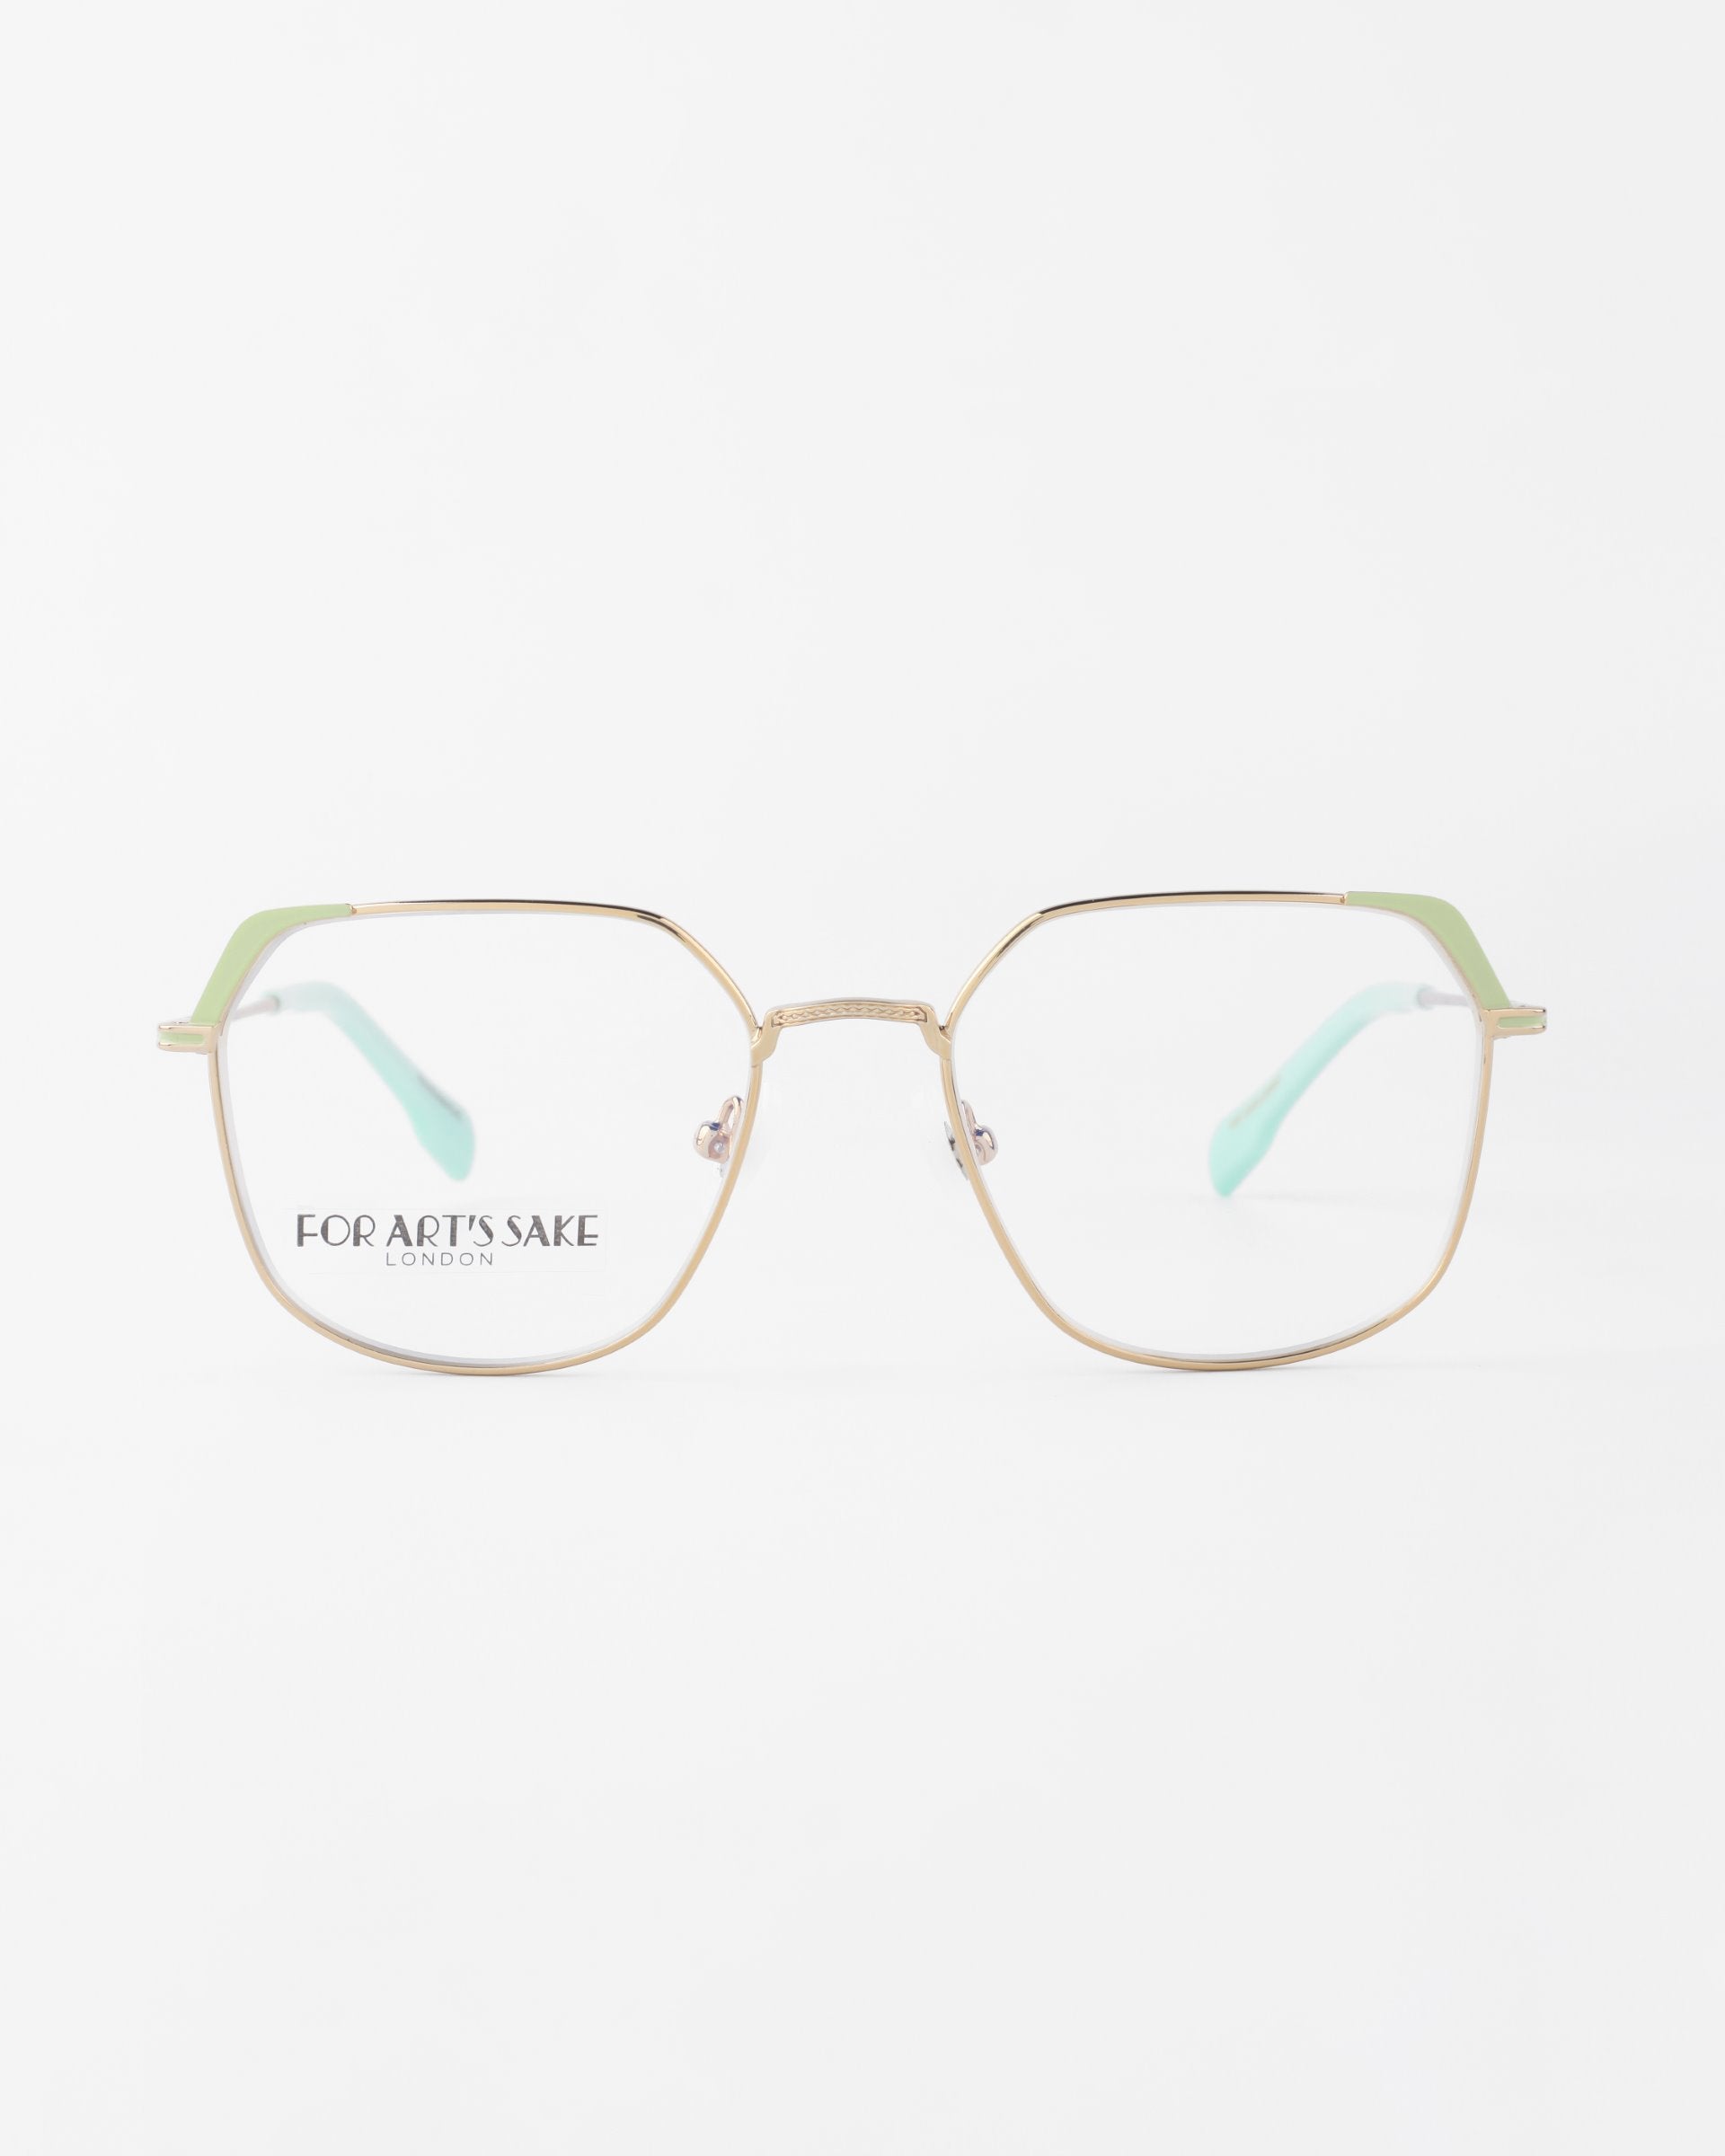 A pair of eyeglasses with a thin metallic frame featuring a hexagonal shape. The temples are light green, and there is text on the left lens reading "FOR ART'S SAKE LONDON". These stylish Godiva glasses from For Art's Sake® offer UVA & UVB protection, perfect for sunny days. The background is plain white.